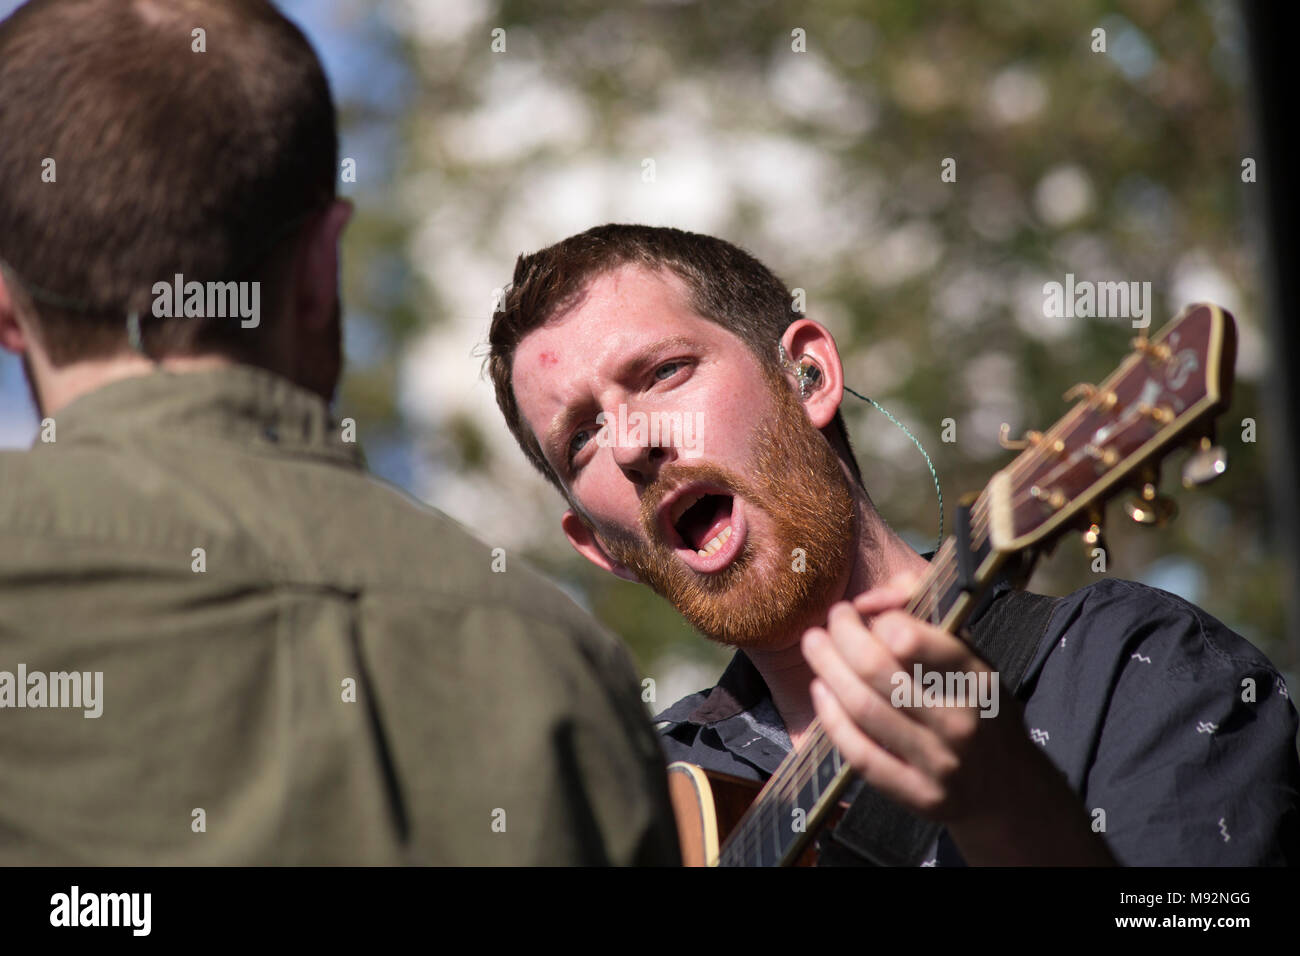 Breabach at Sunfest 2015 Stock Photo